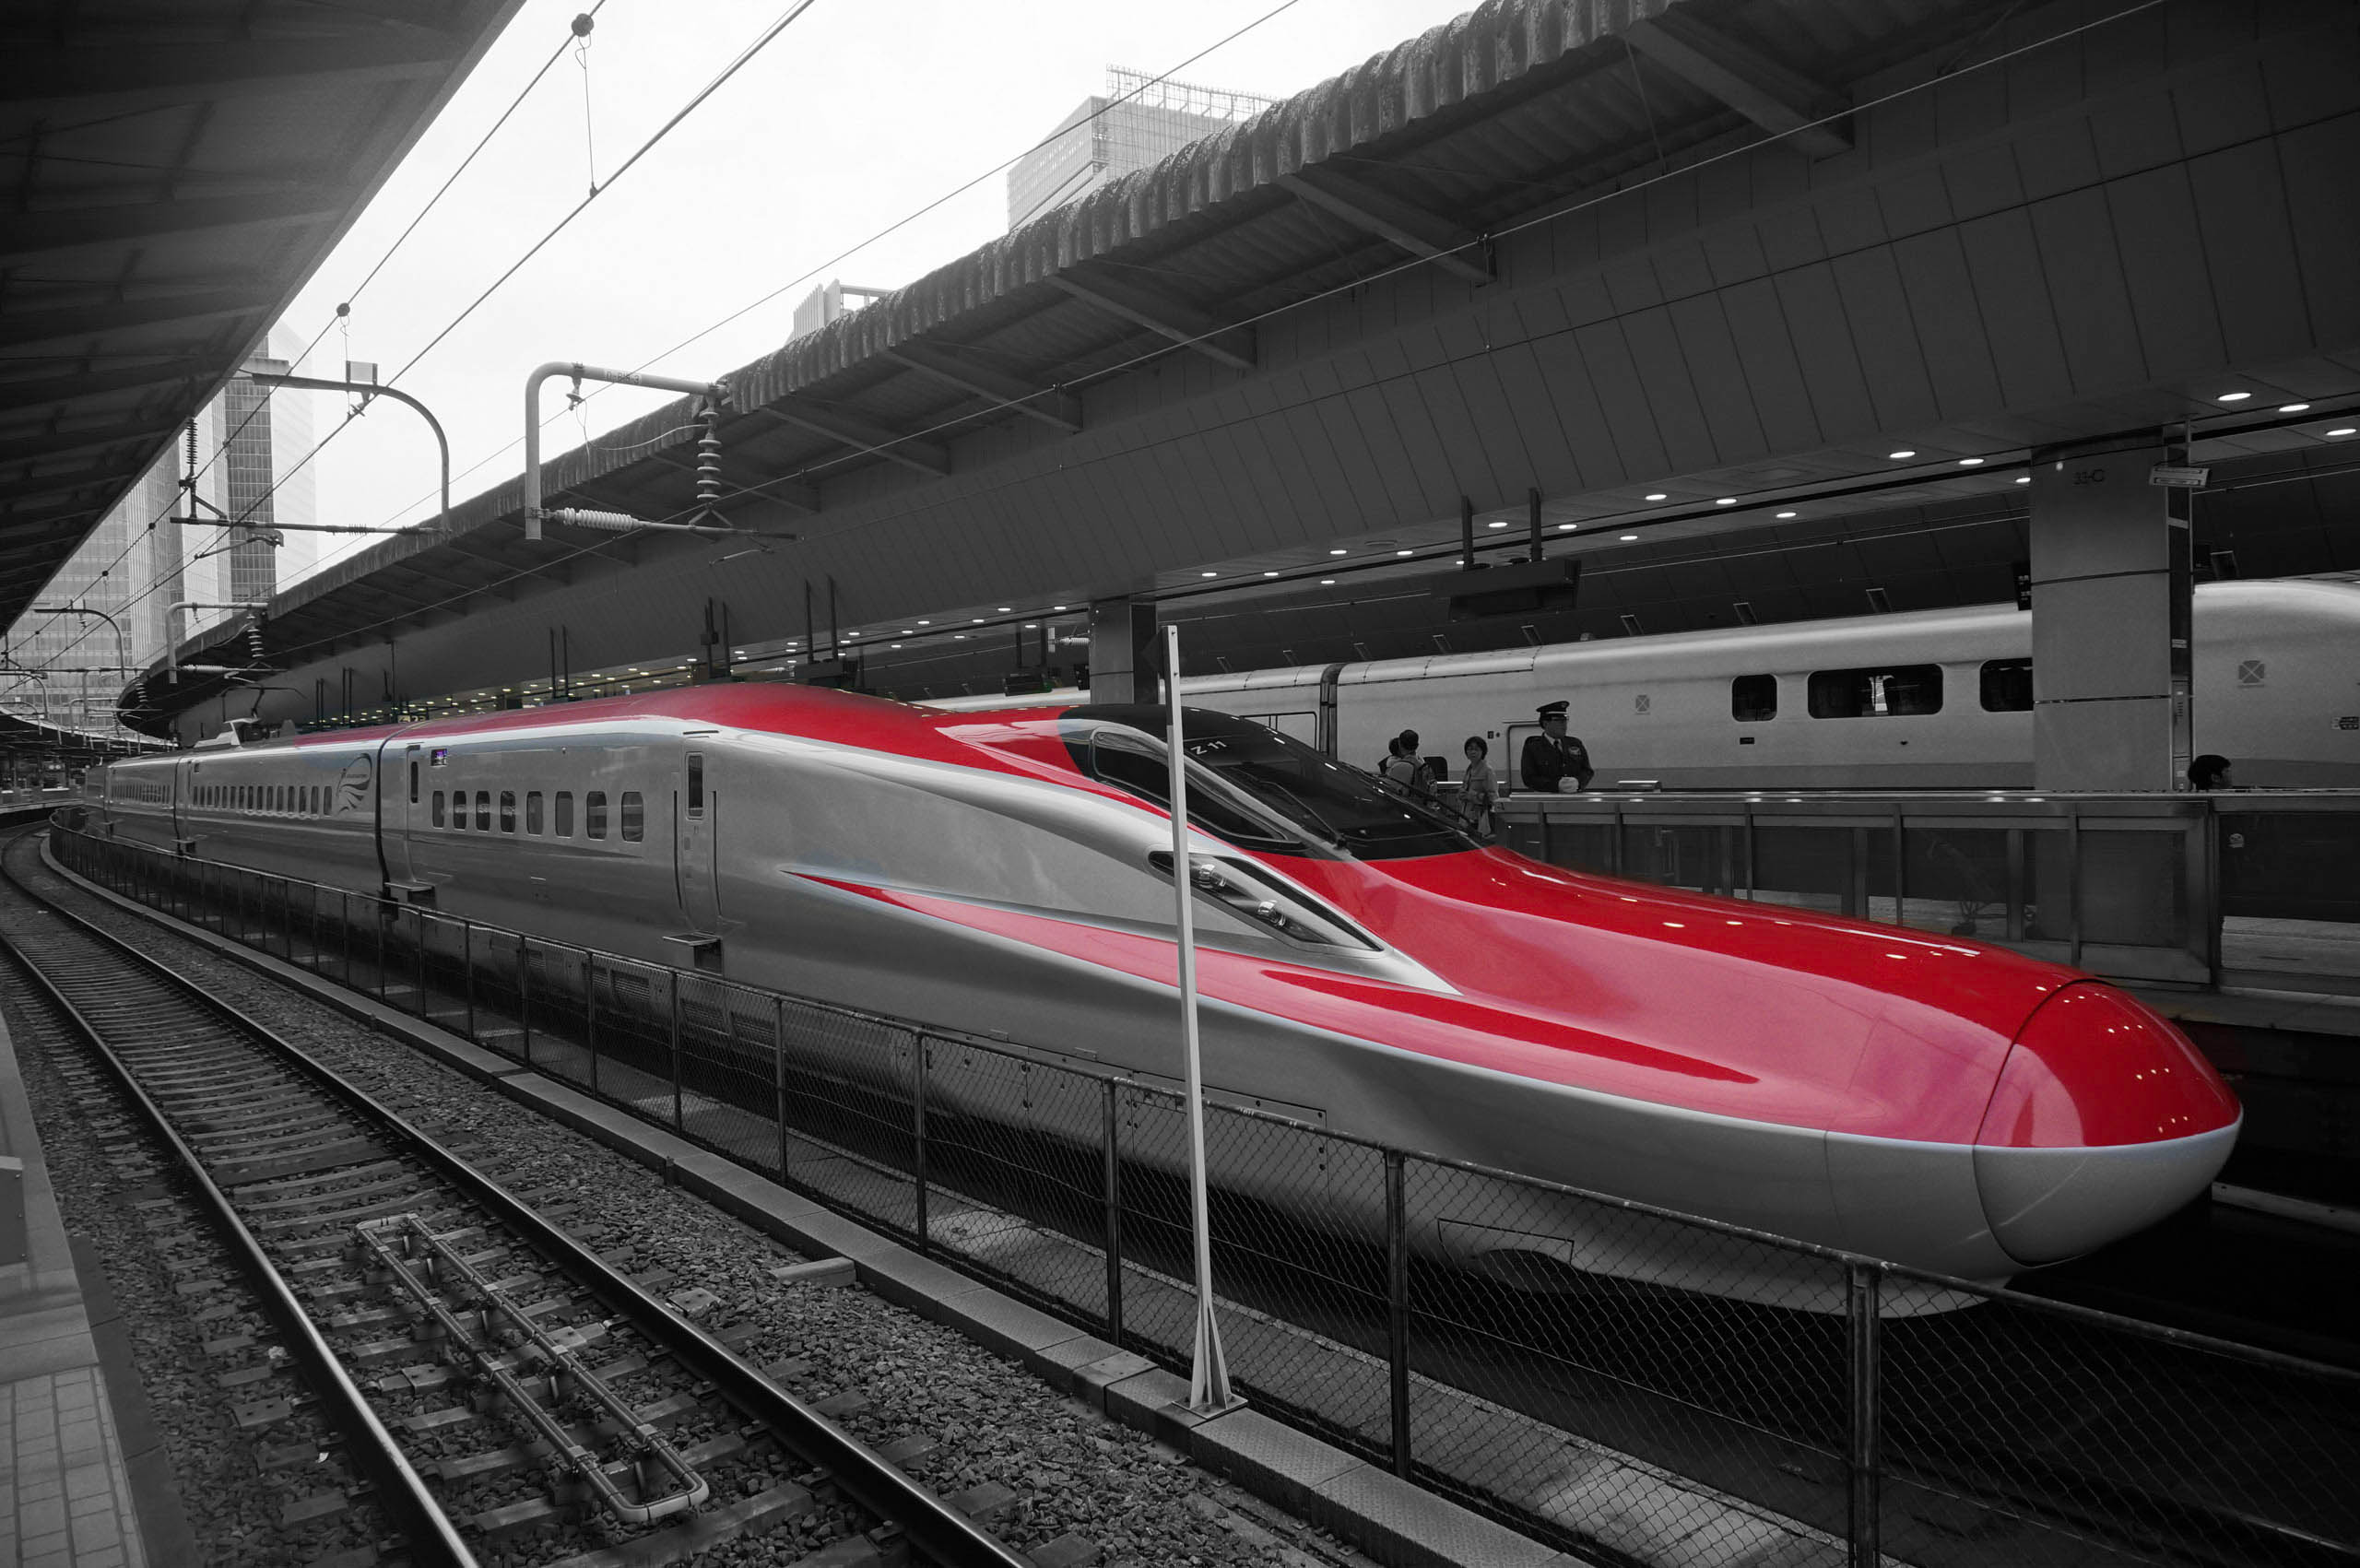 The Bullet Train that took us from Tokyo to Kyoto